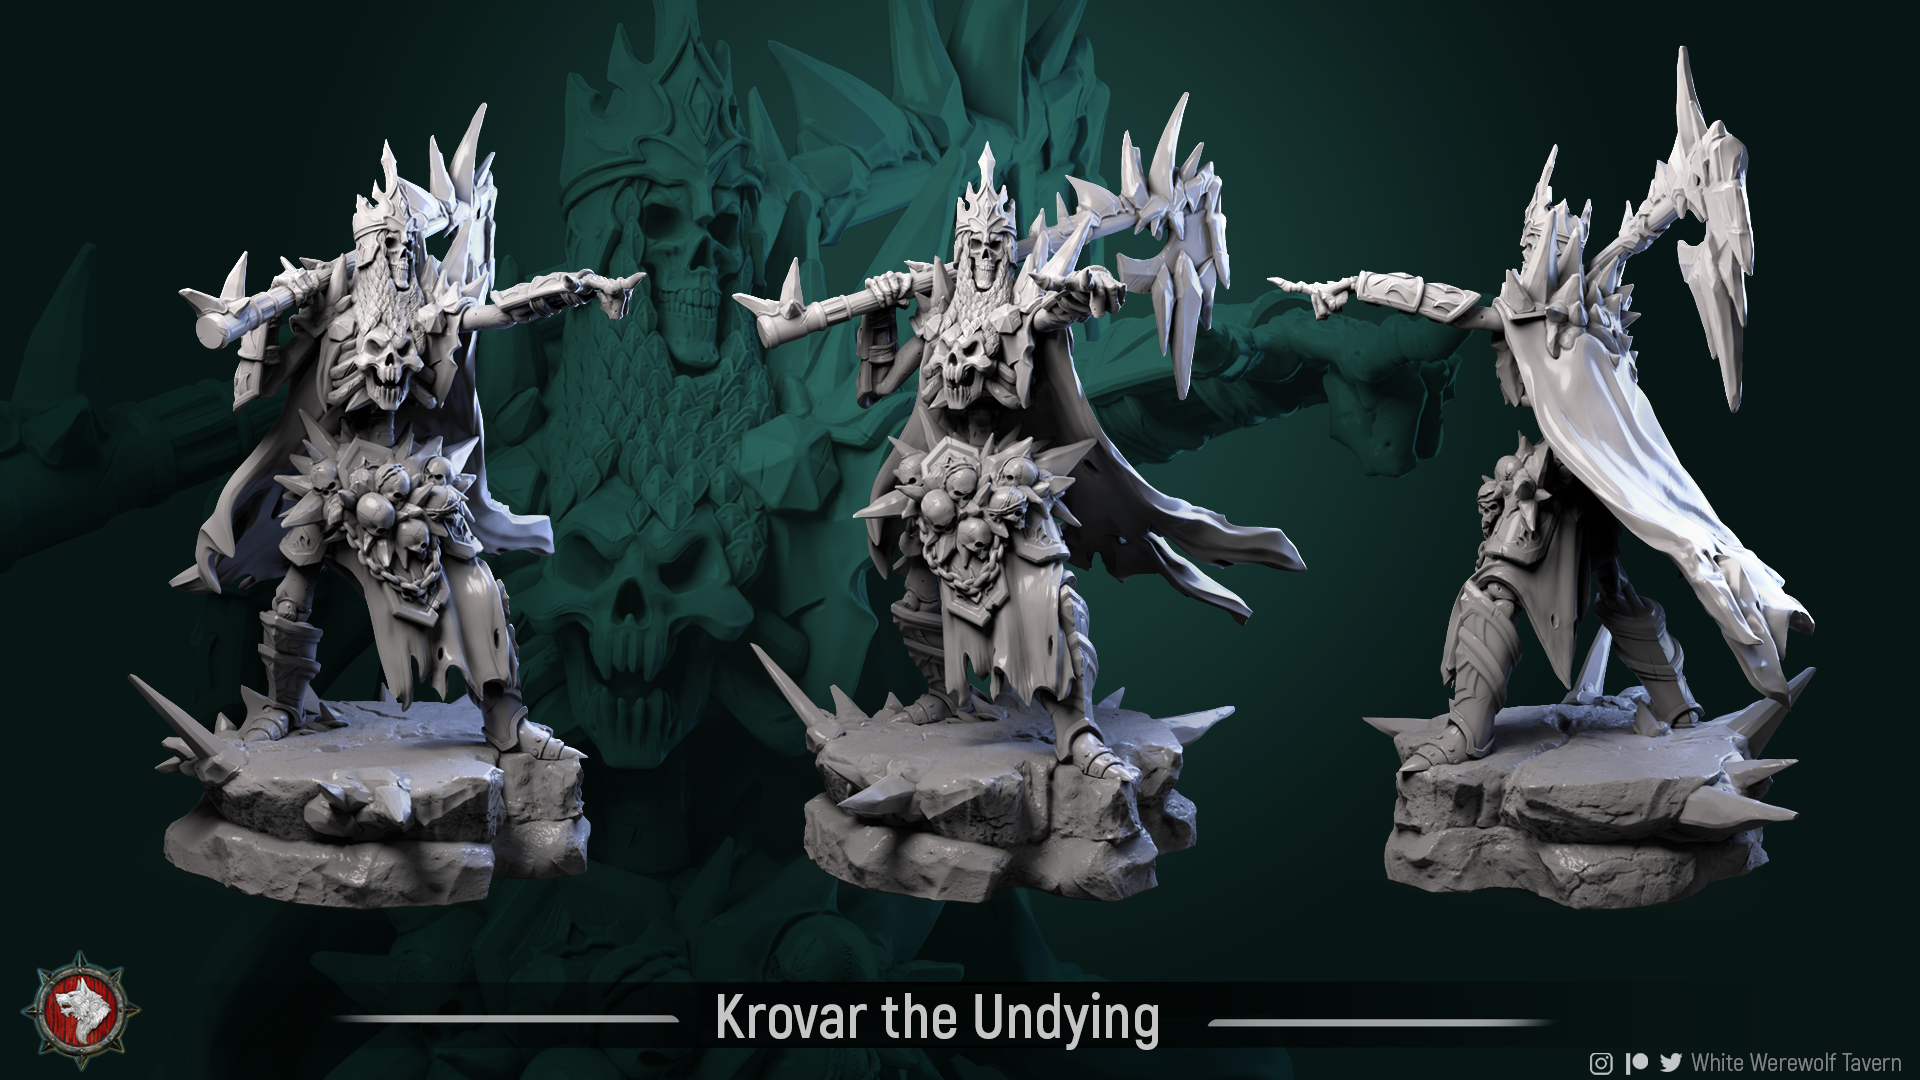 Krovar the Undying